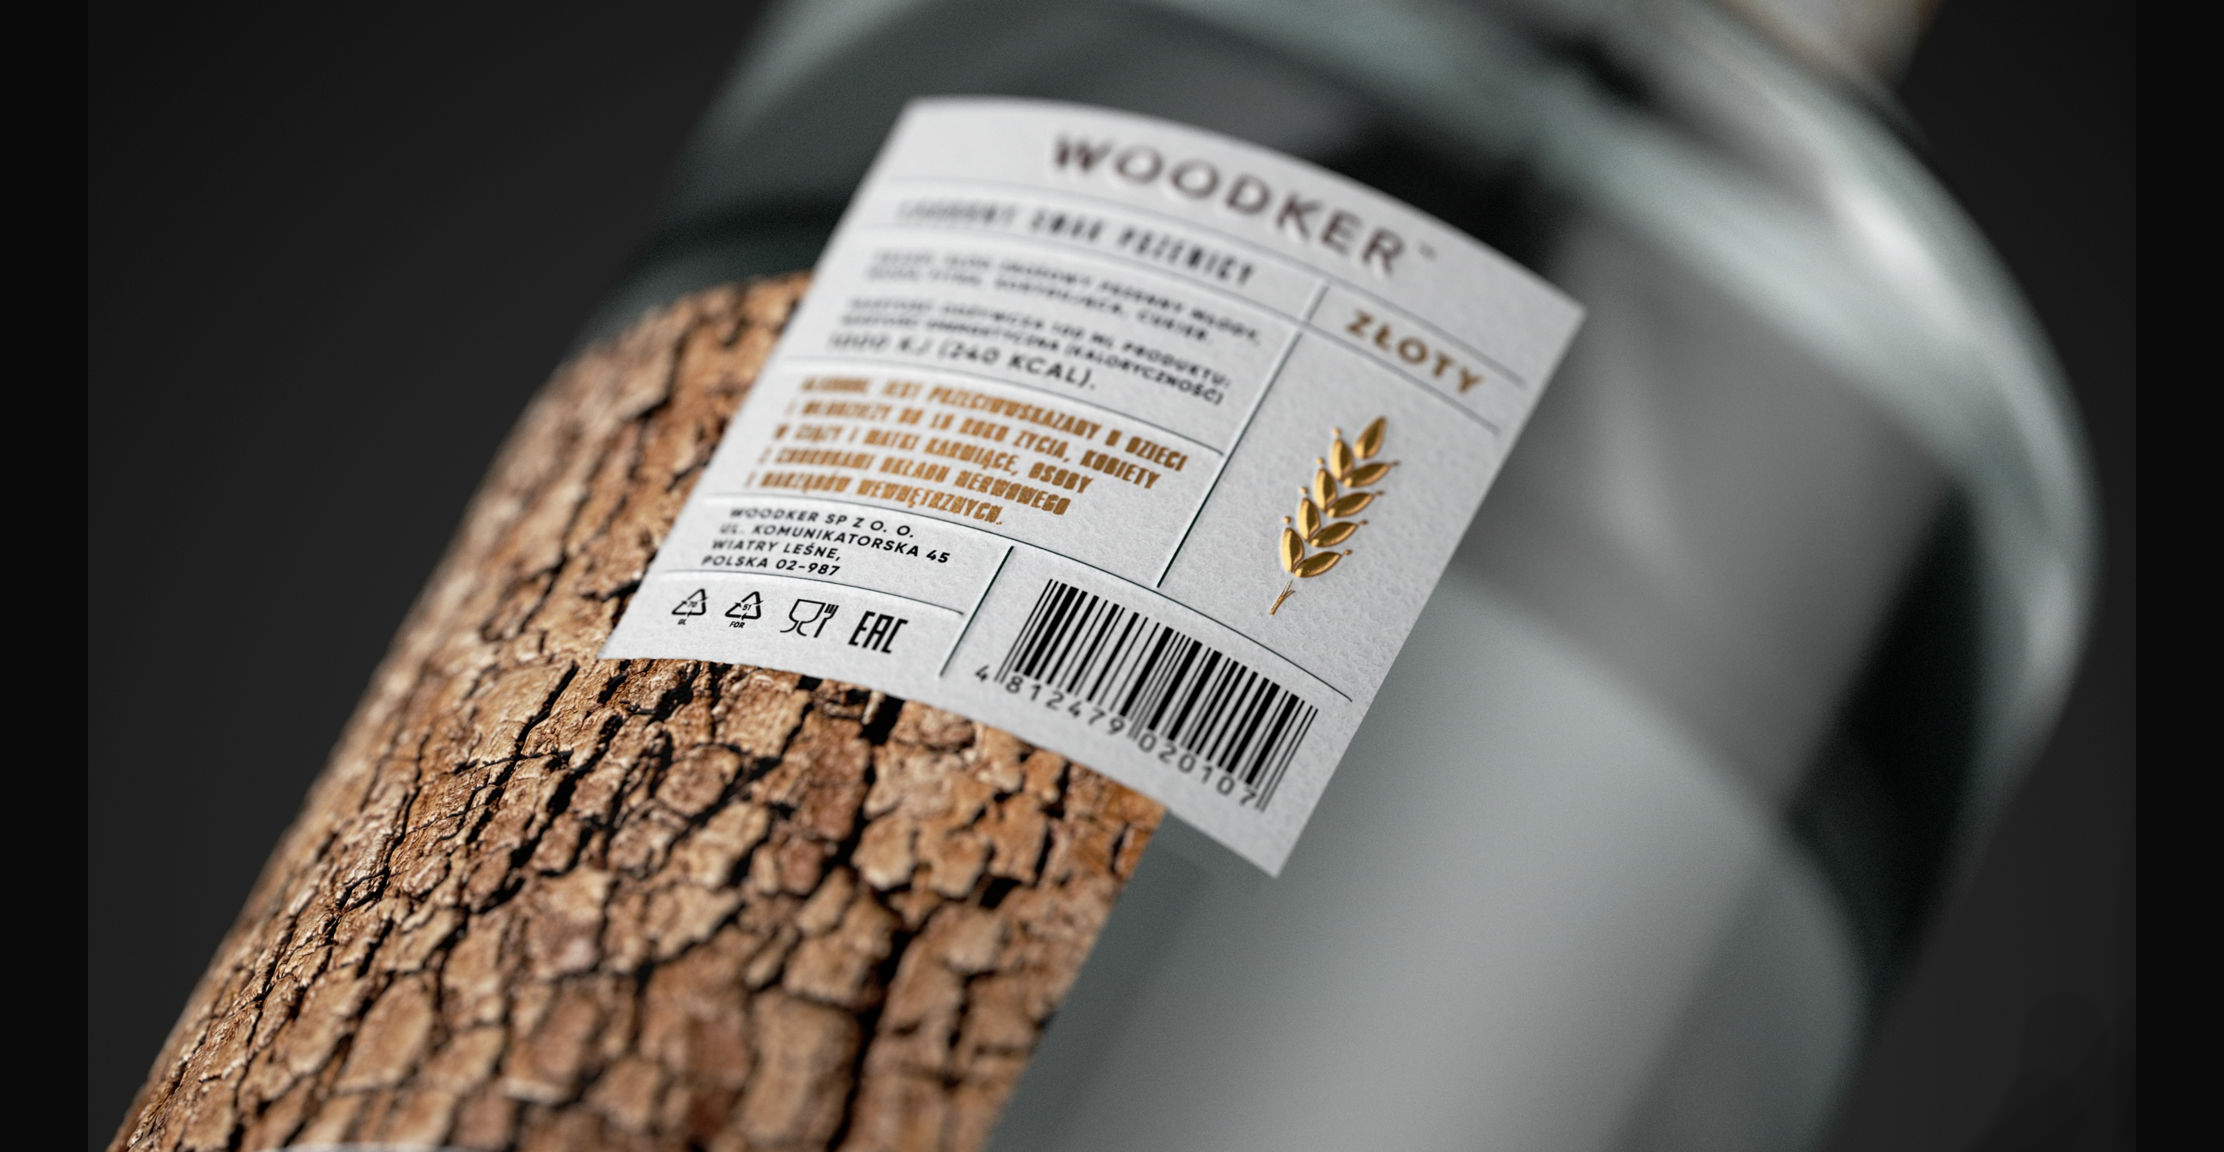 Woodker vodka packaging with bark effect and raised print